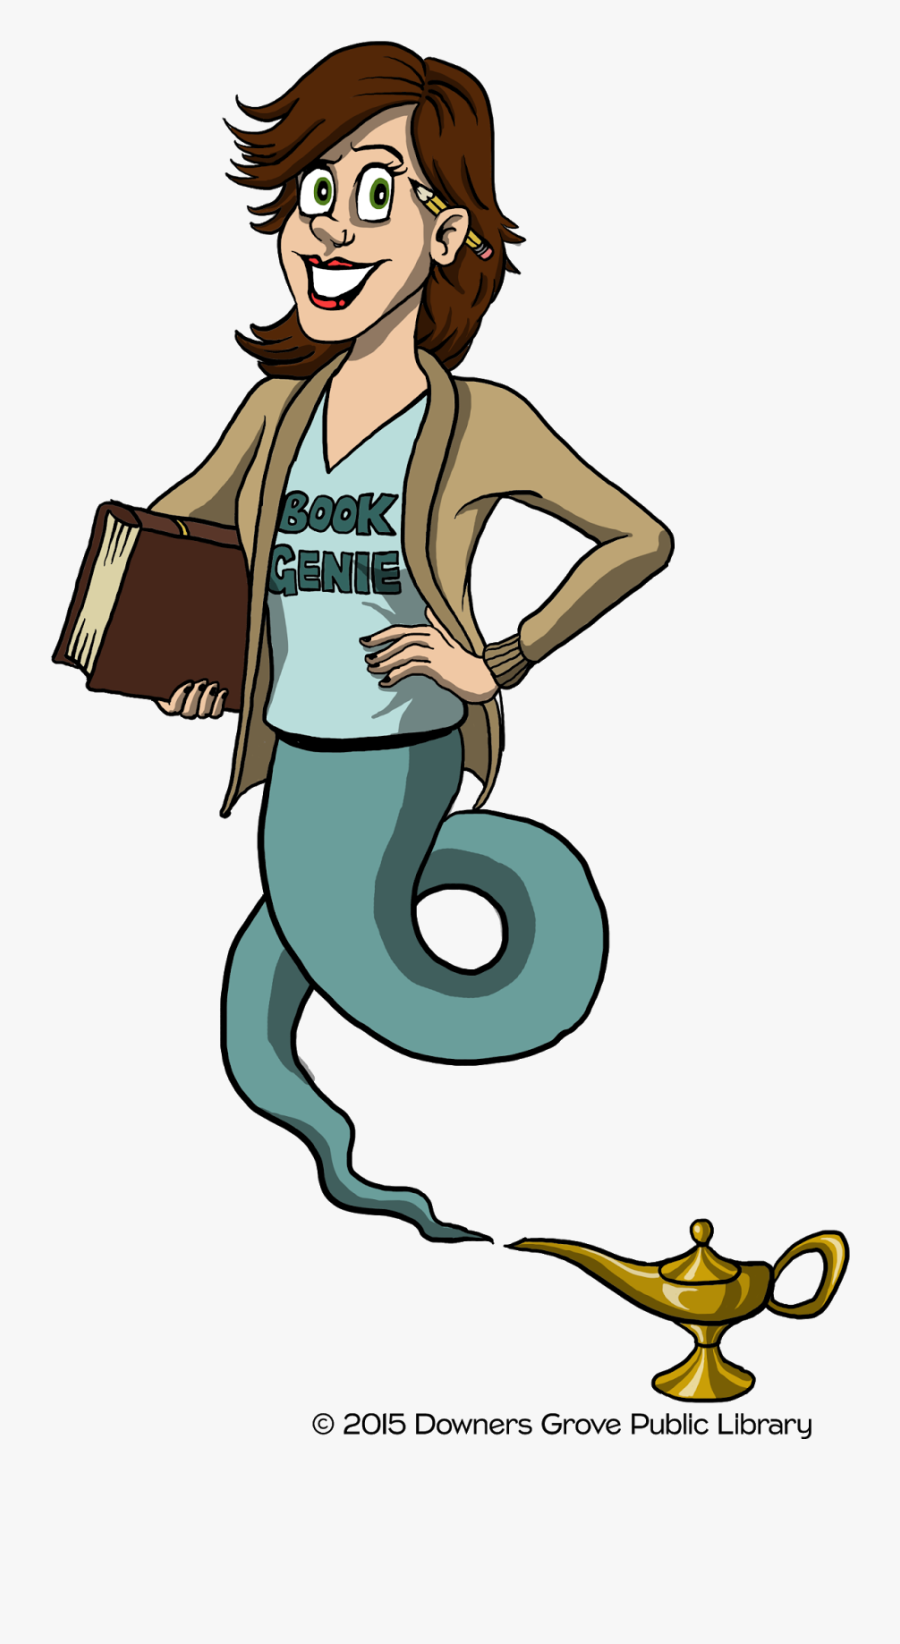 What Is Book Genie And Why Did It Win That Is The Subject - Cartoon, Transparent Clipart